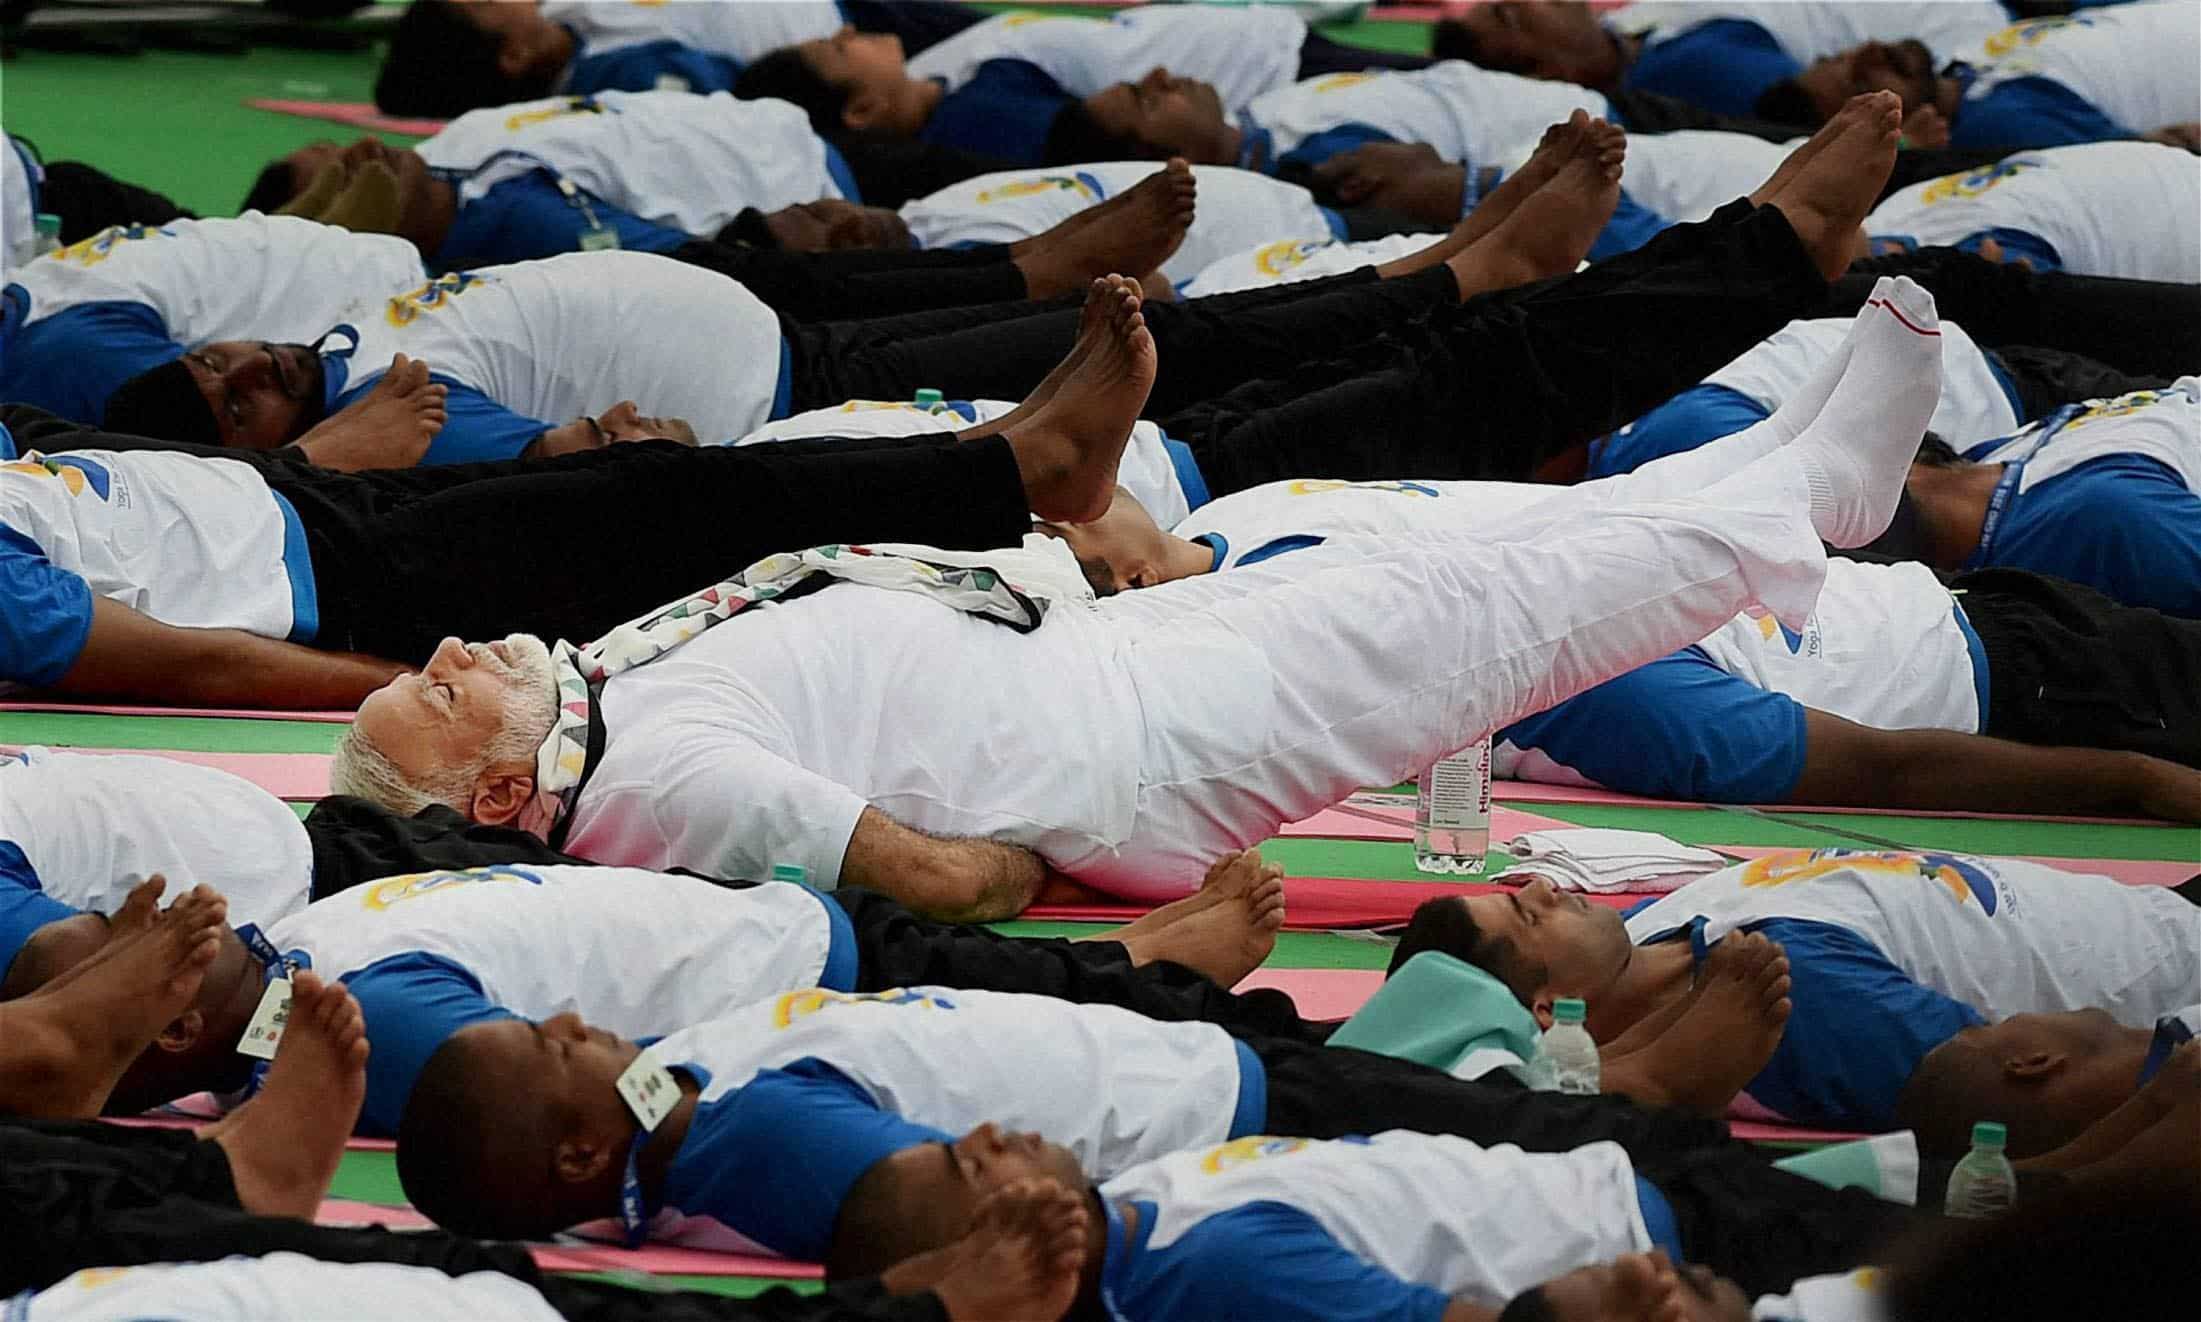 Standing out from the crowd, PM Modi all dressed in white takes part in mass yoga event. PTI